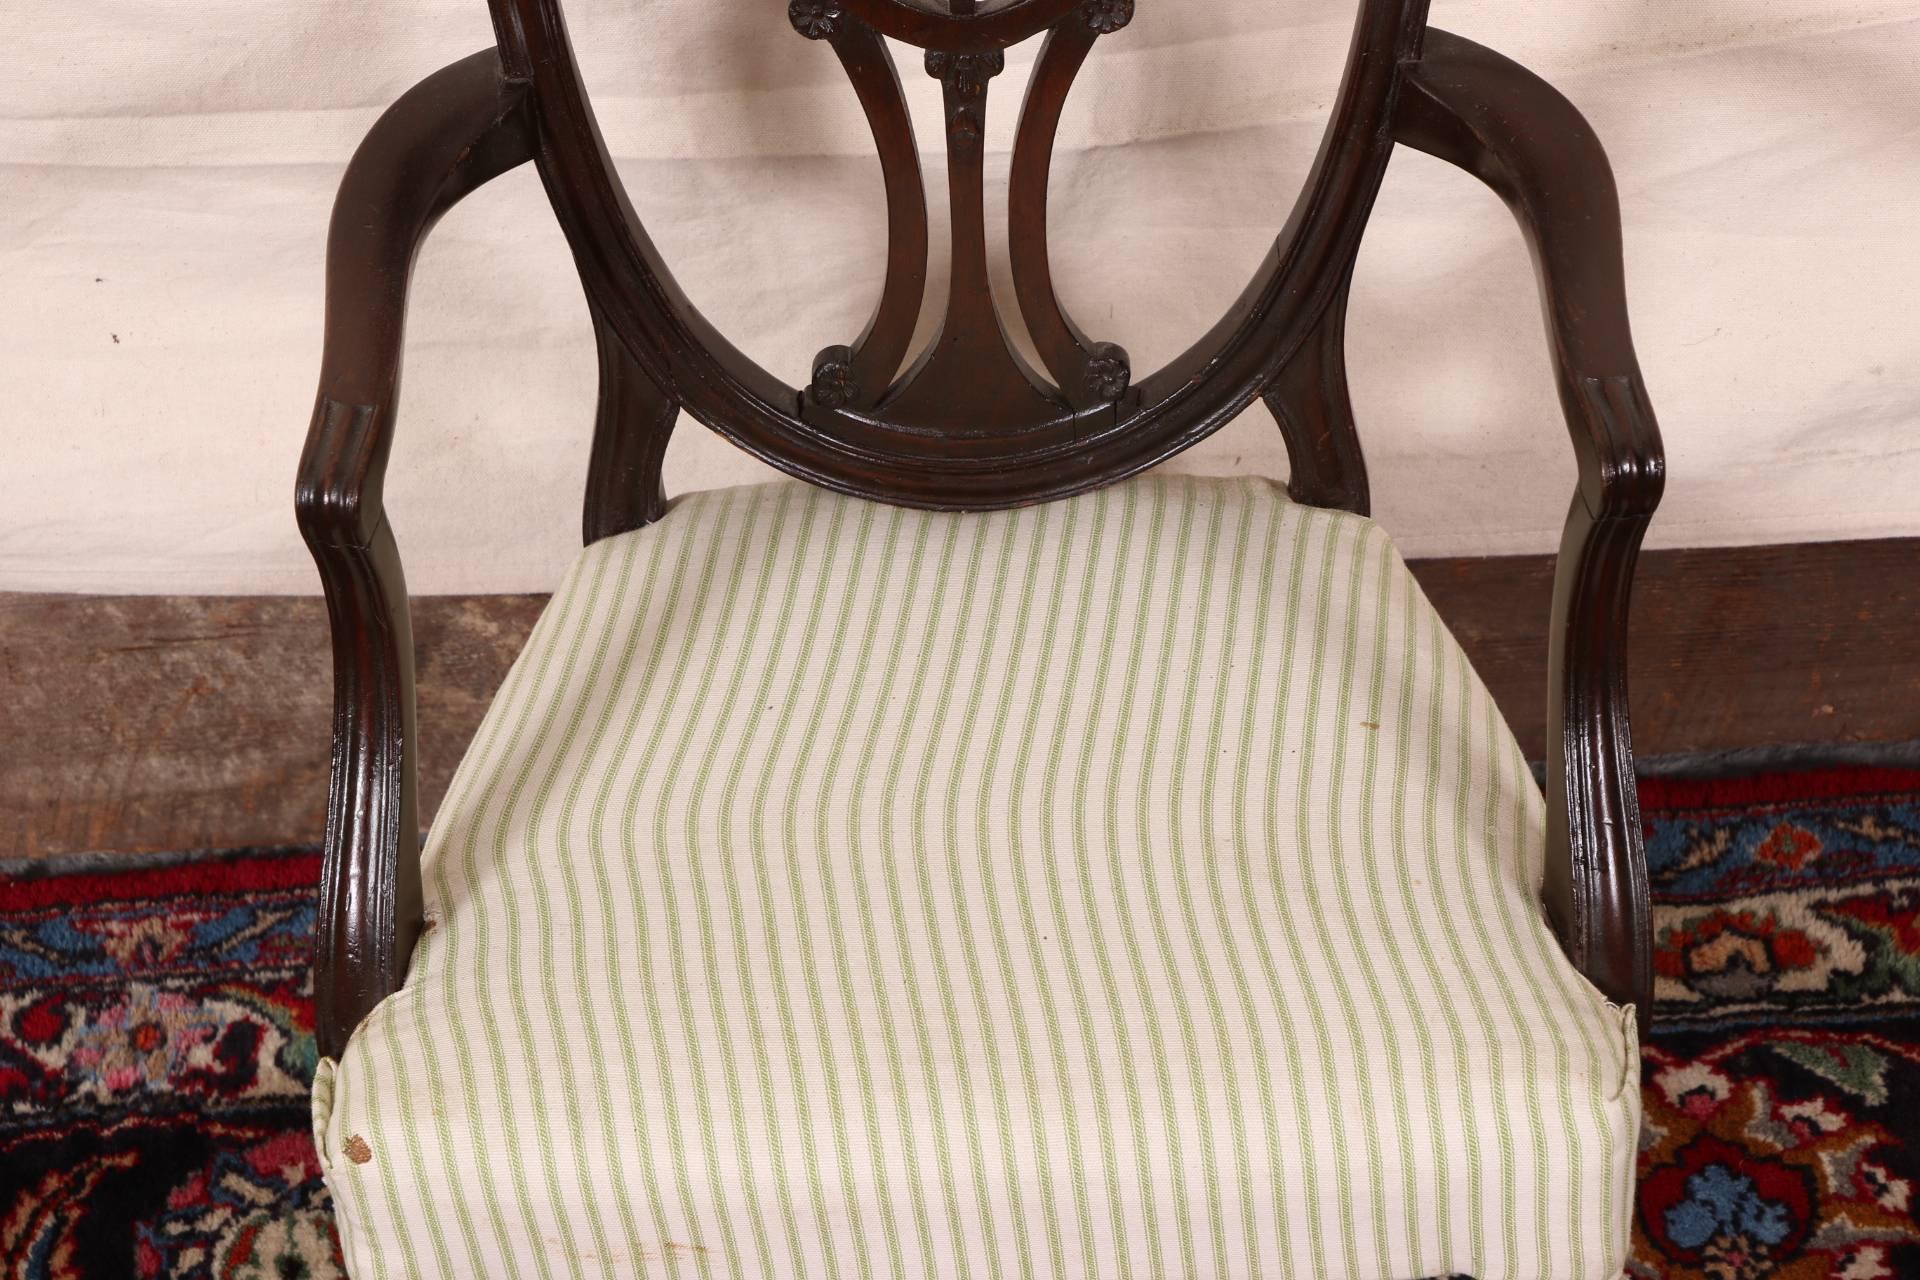 With a shaped crest rail and openwork splat back with wheat sheaf motif at the top. With curved arms, and raised on square front legs with spade feet and splayed back legs. Green and white striped seat upholstery.
Condition: Wear to crest rail,